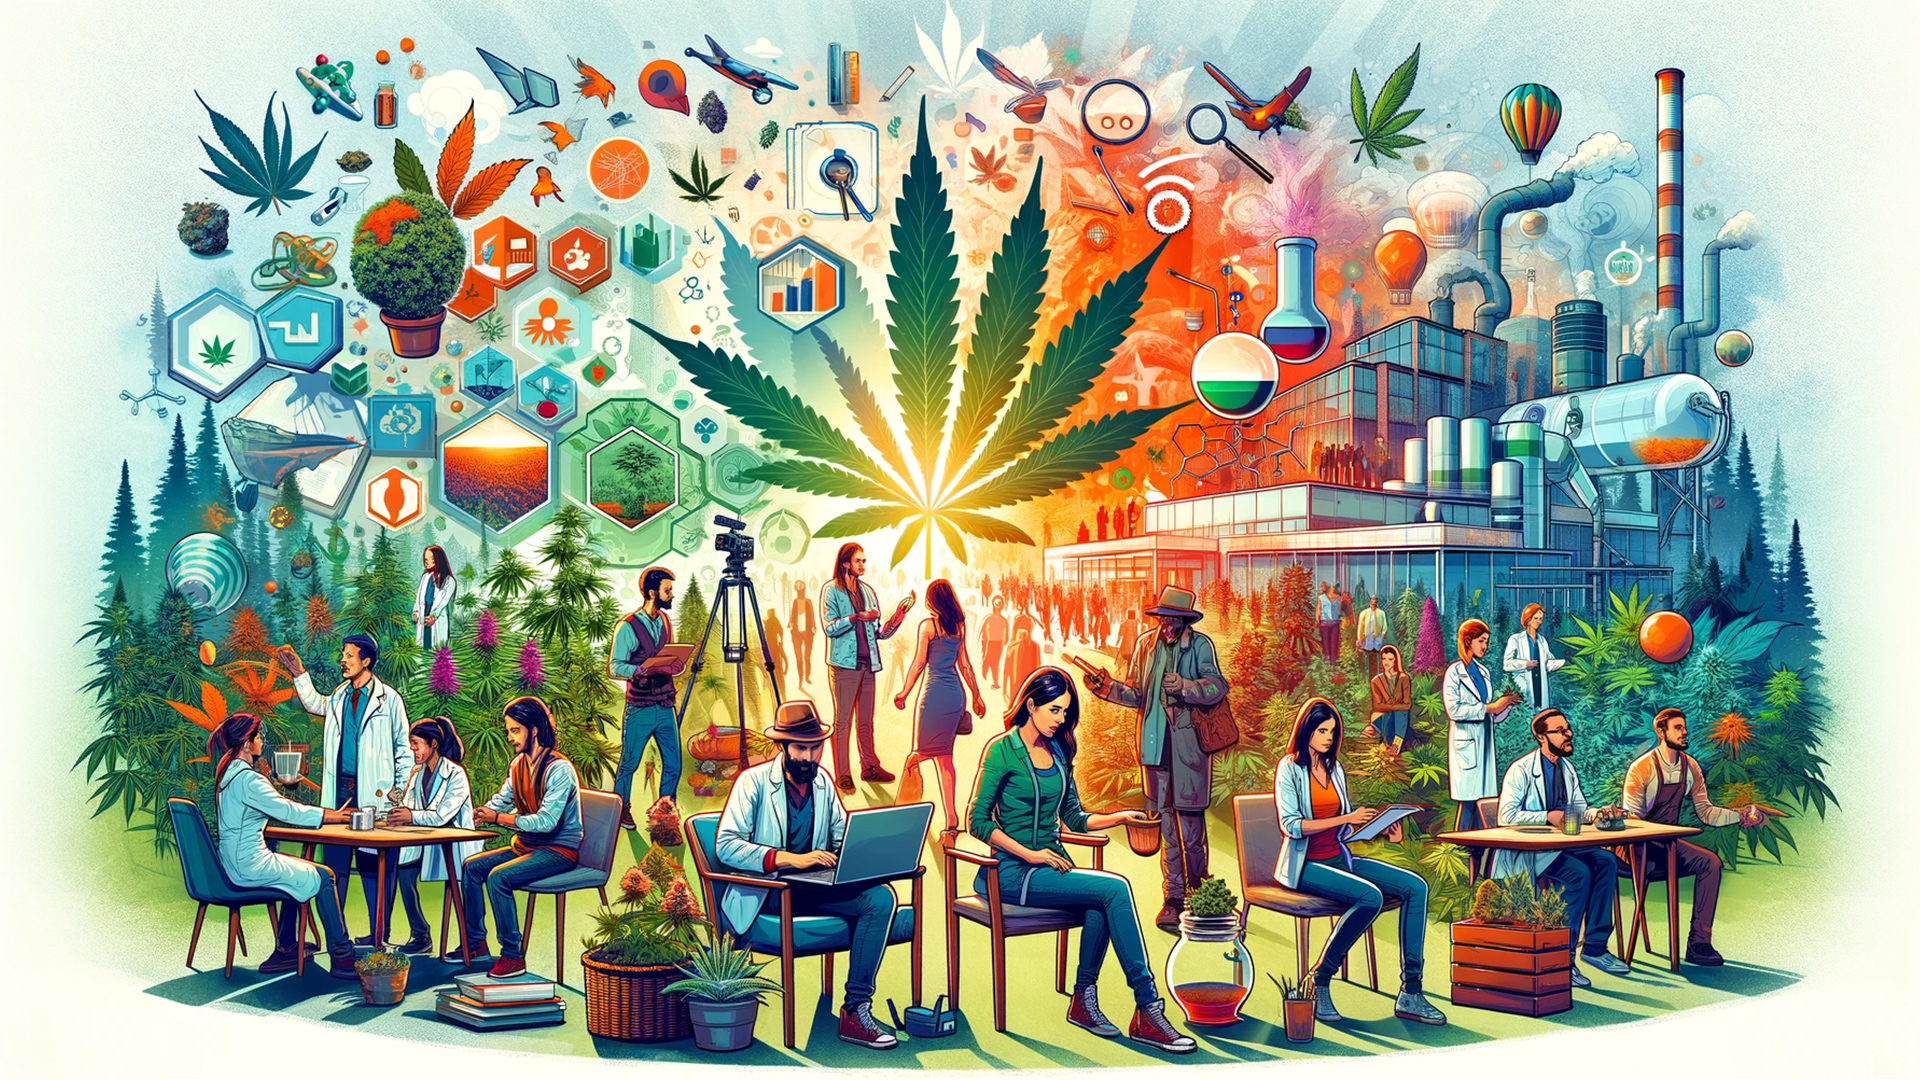 A lively depiction of the cannabis industry, highlighting diverse people engaged in cultivation, research, and education against a backdrop blending nature and technology.